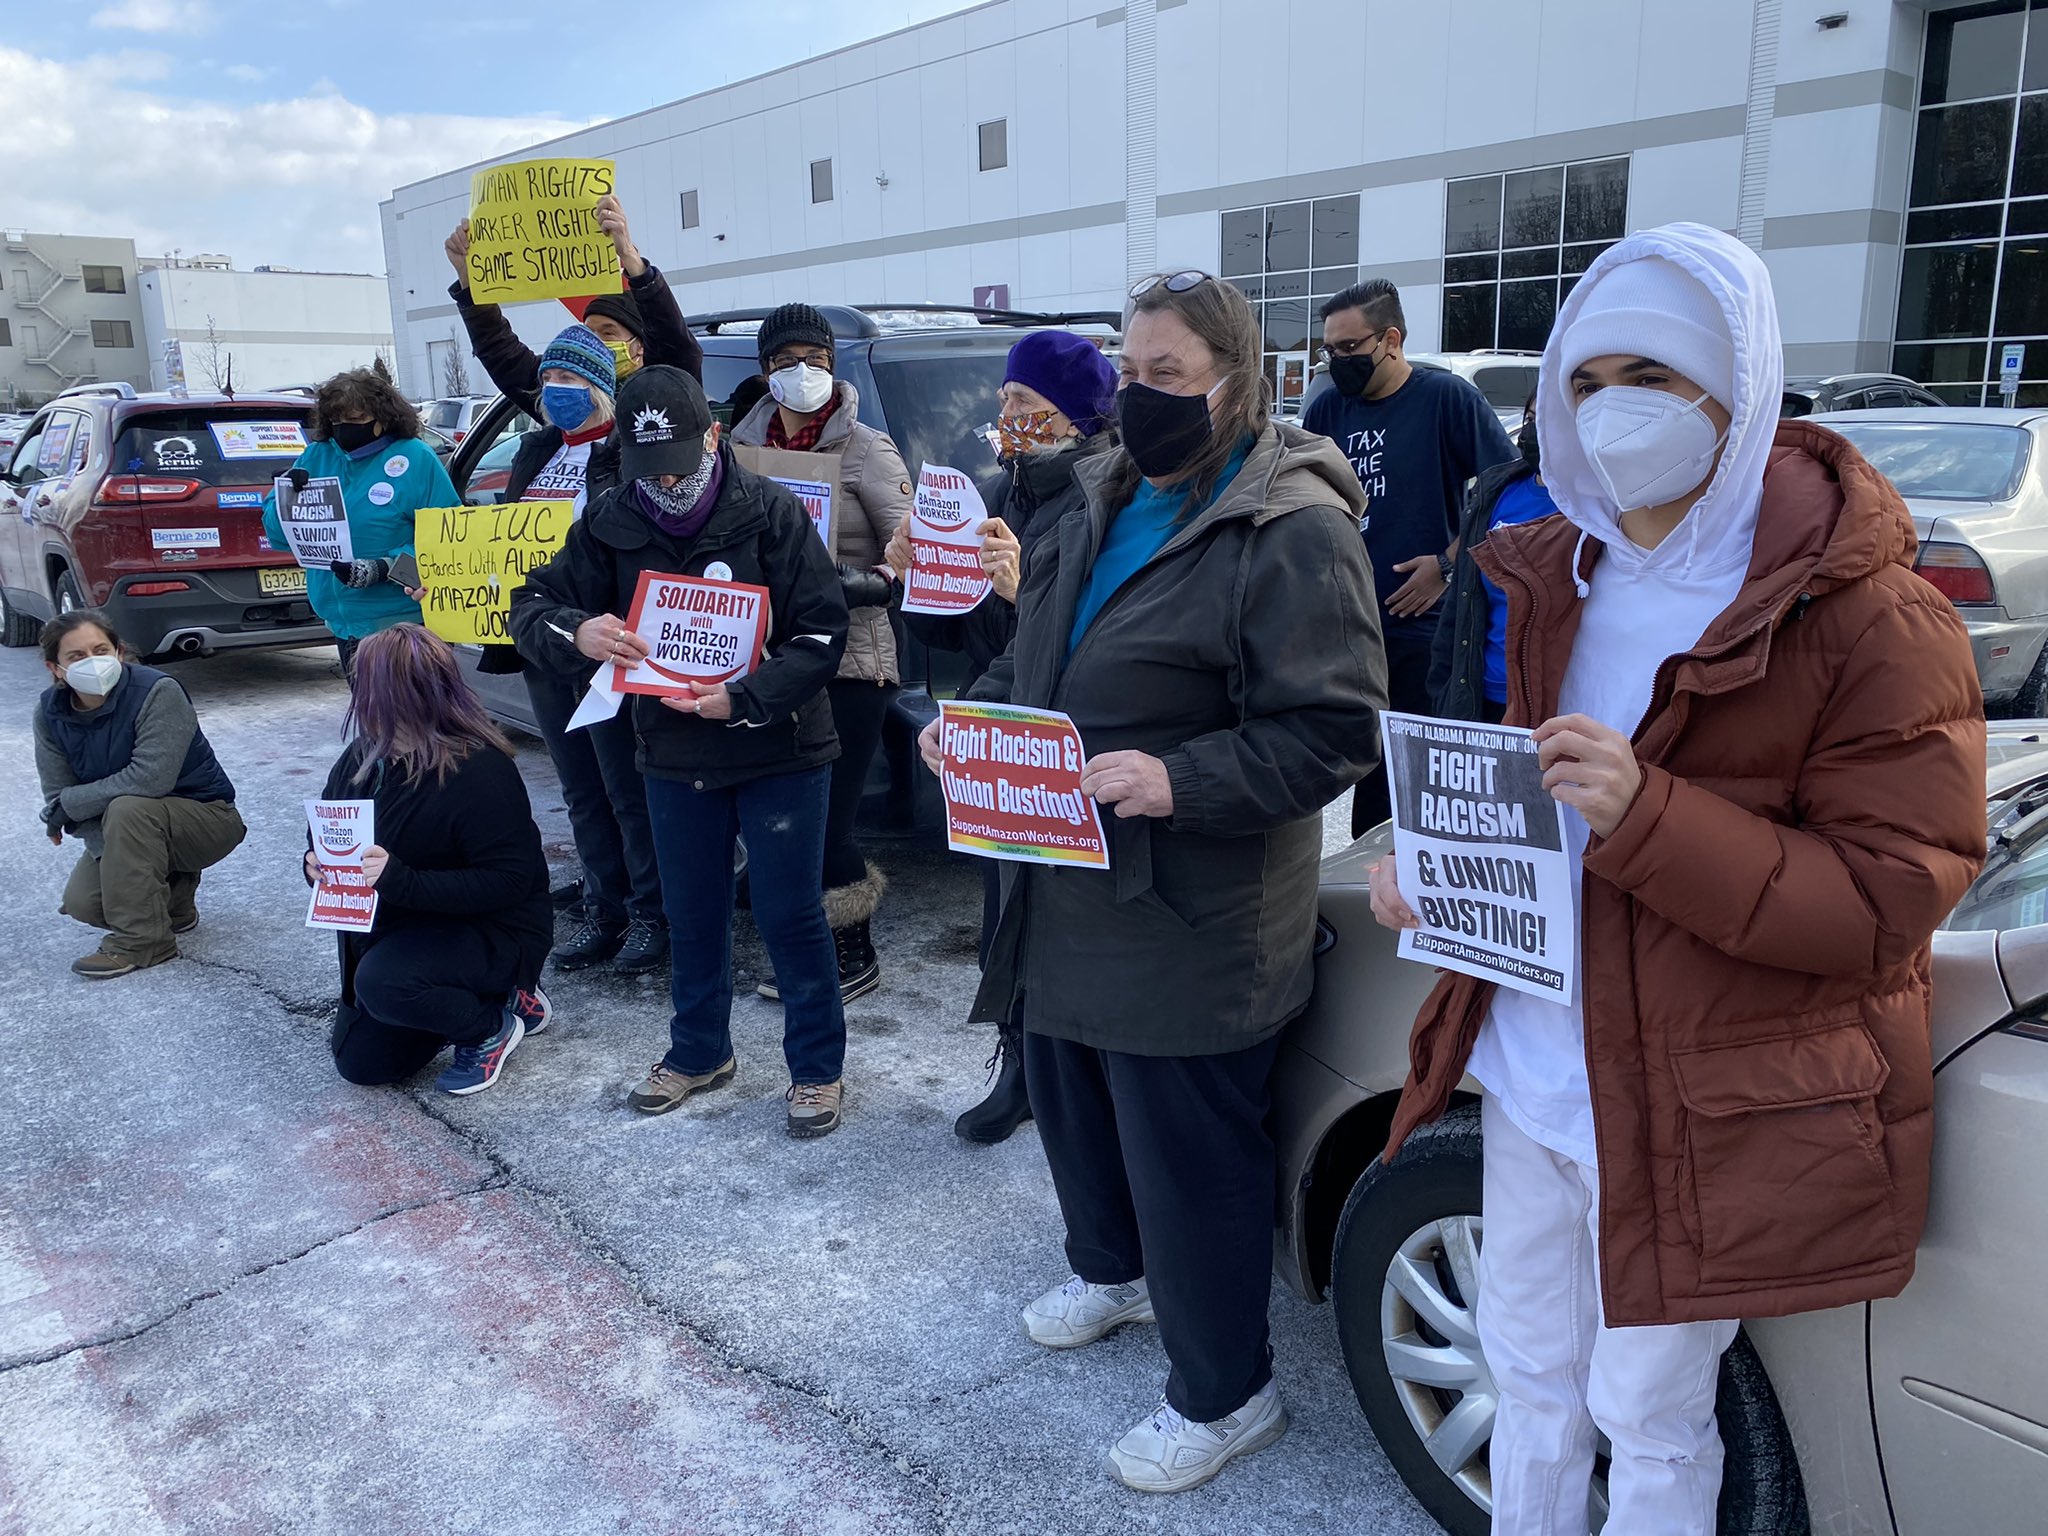 National Day of Solidarity With Alabama Amazon Workers - Carteret, NJ